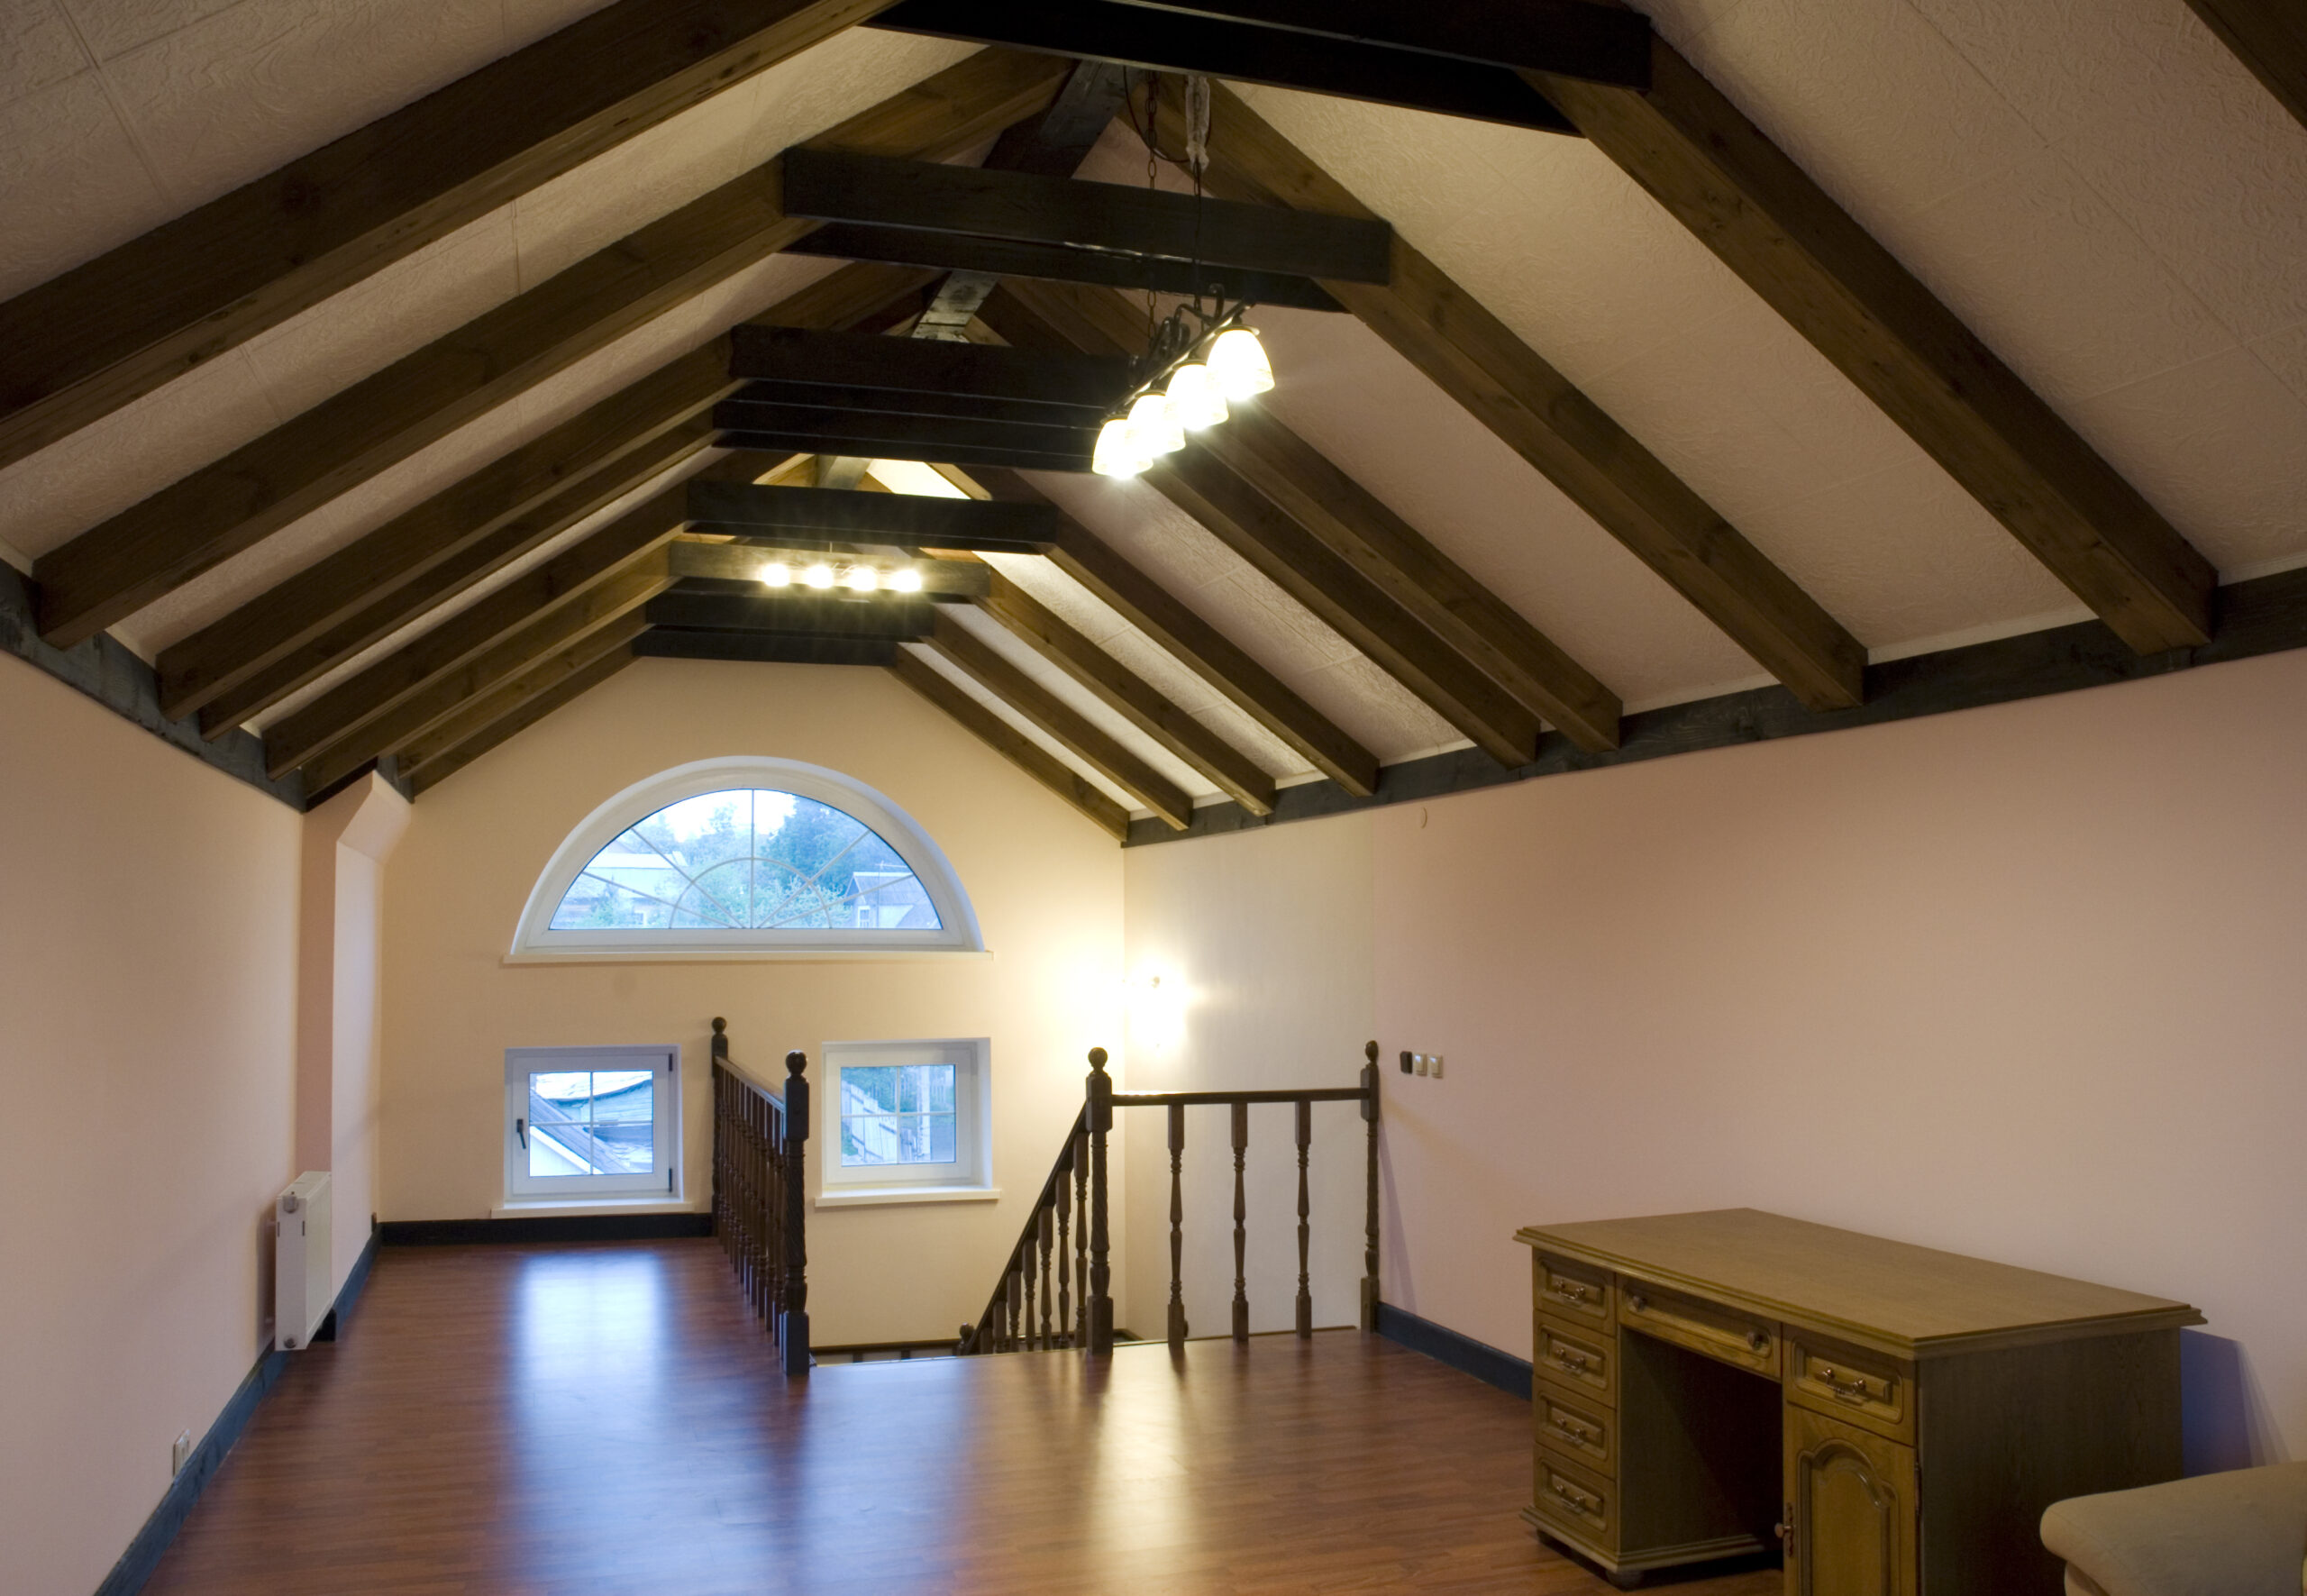 How to Get Rid of Pests in Your Attic?Axatax